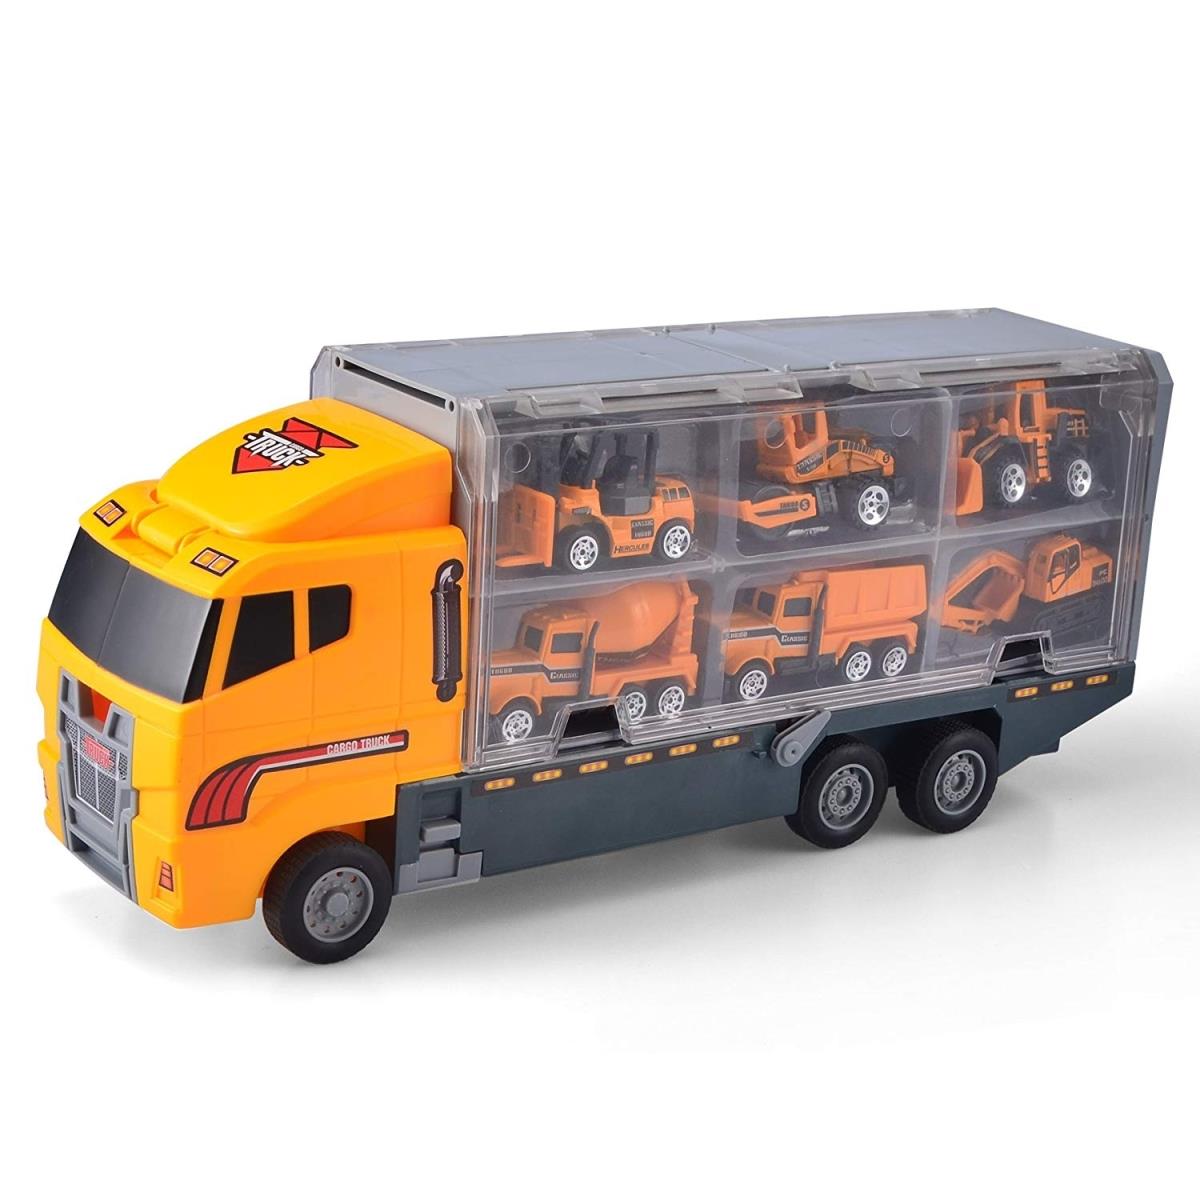 Picture of AZ Trading & Import PS108 11 in 1 Construction Truck Vehicle Car Toy Set Play Vehicles in Carrier Truck